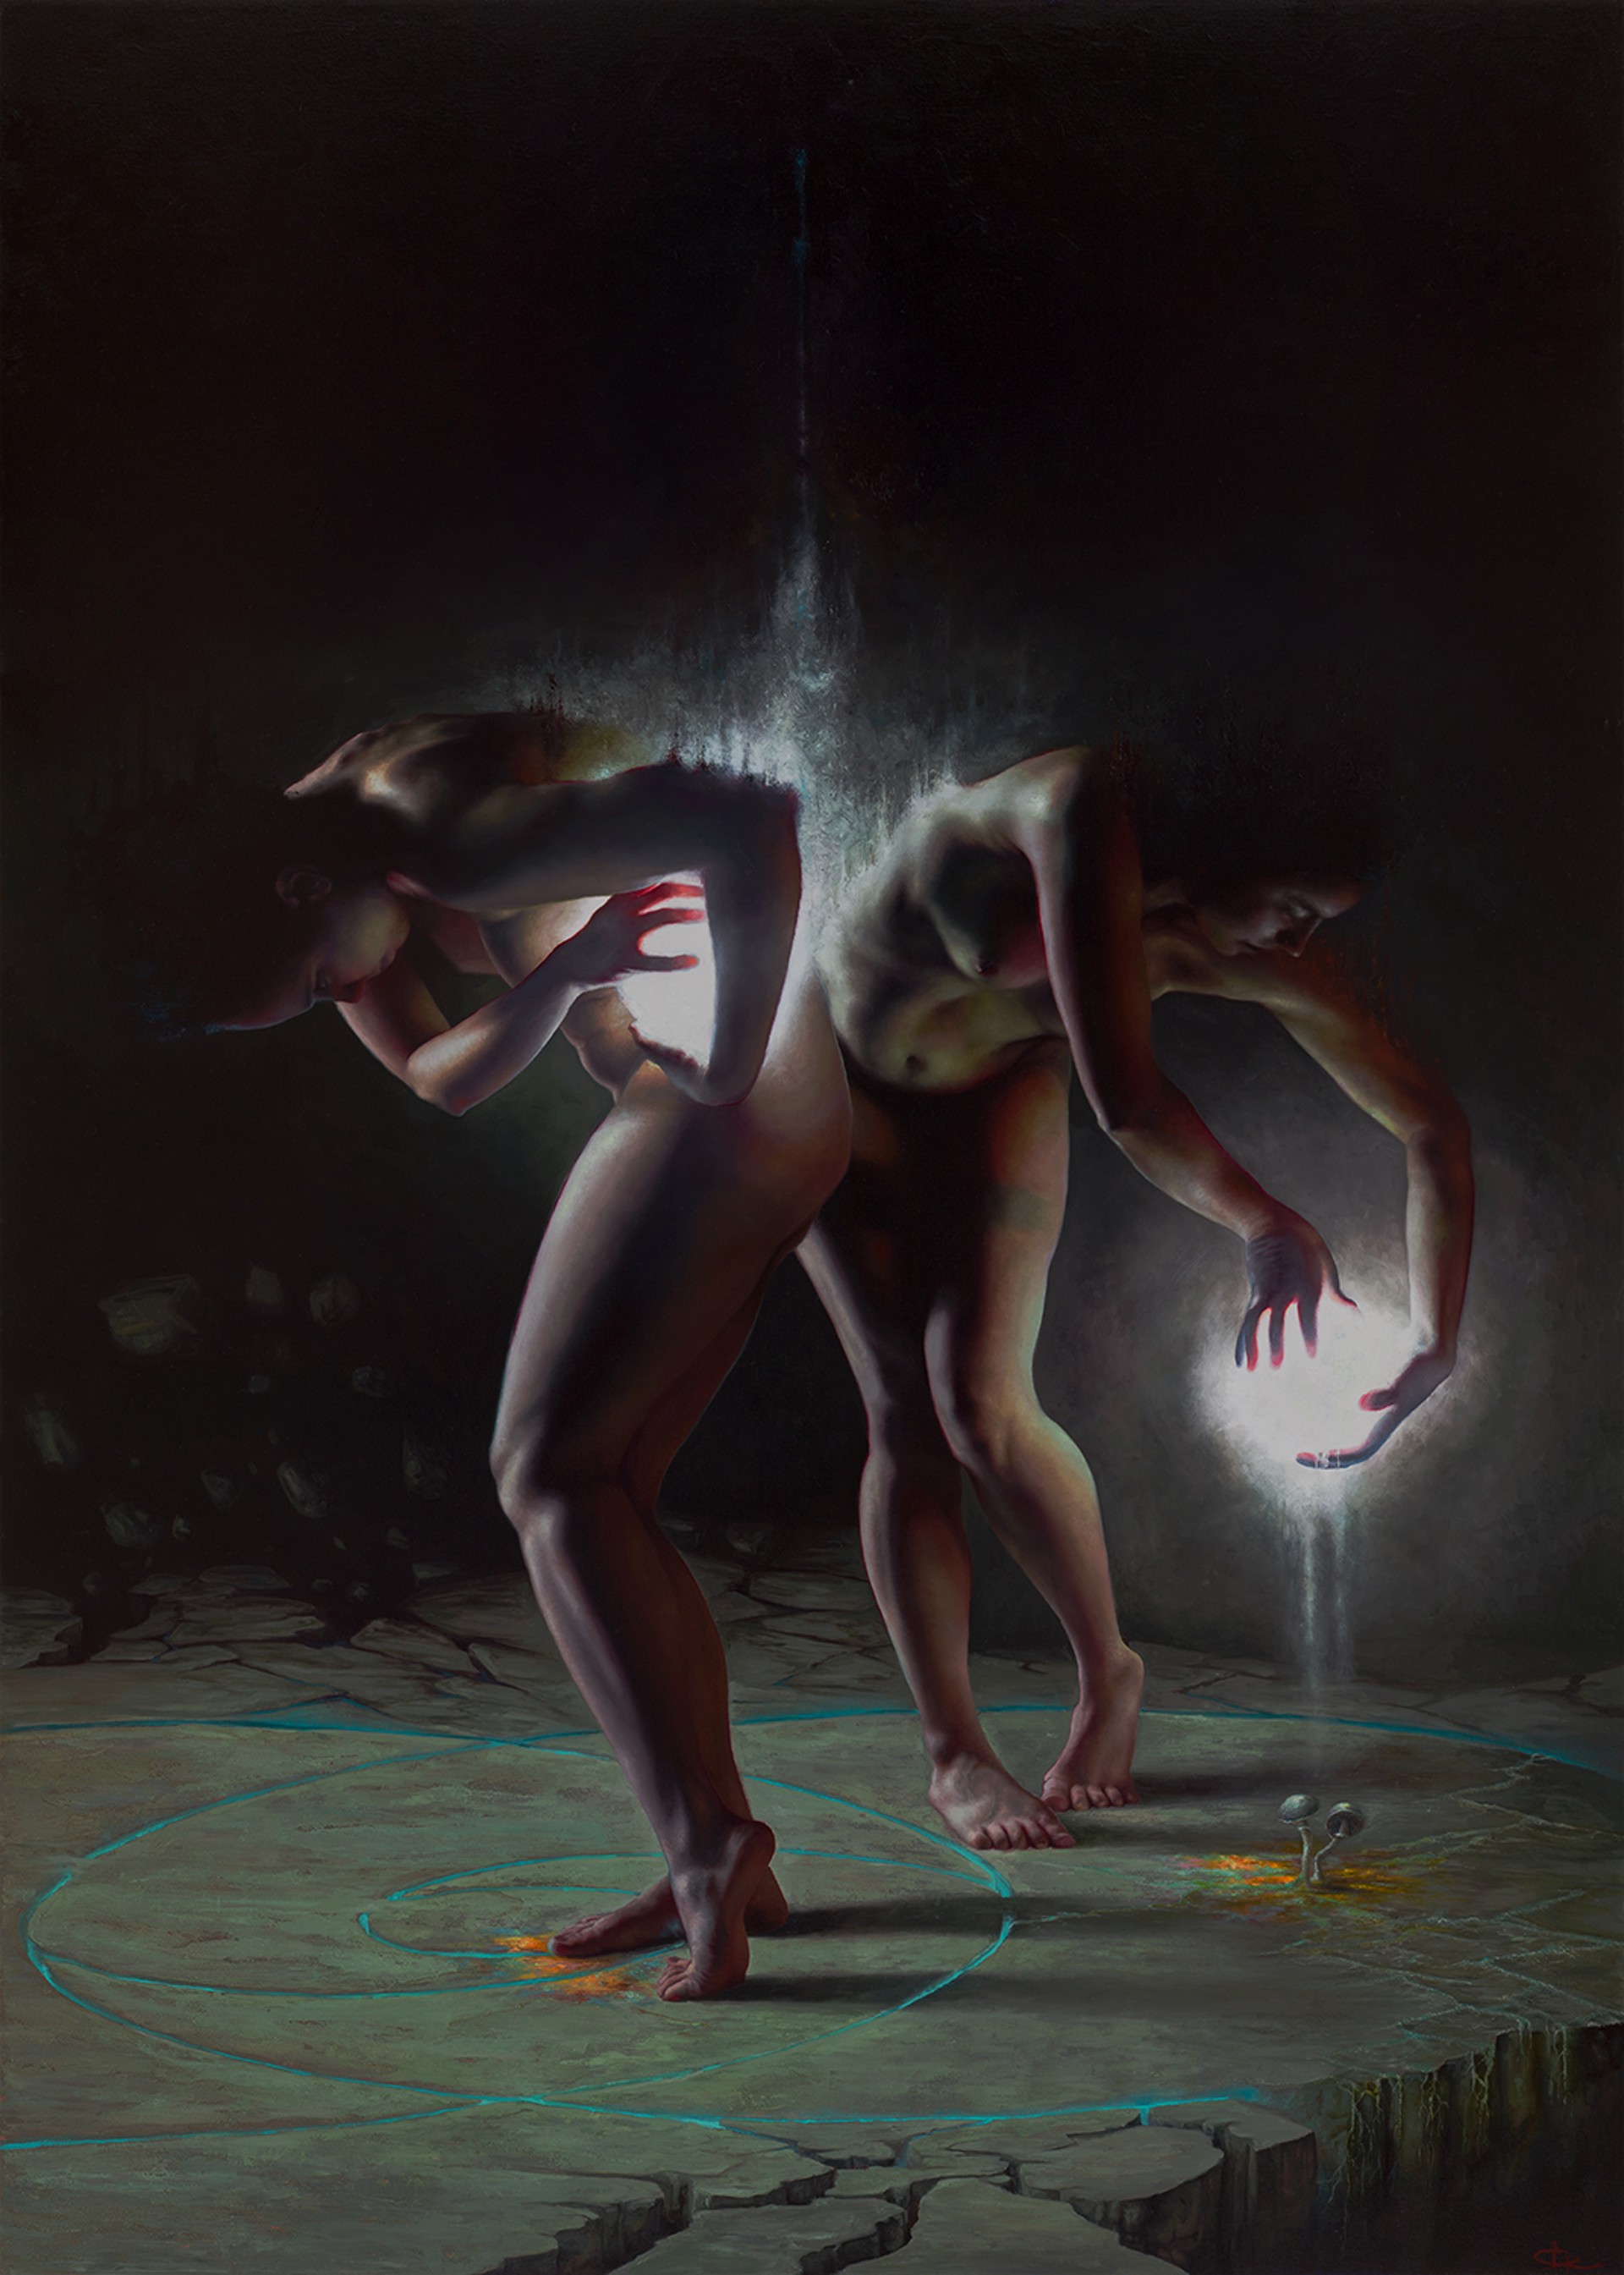 Dancing with Duality by Christopher Remmers